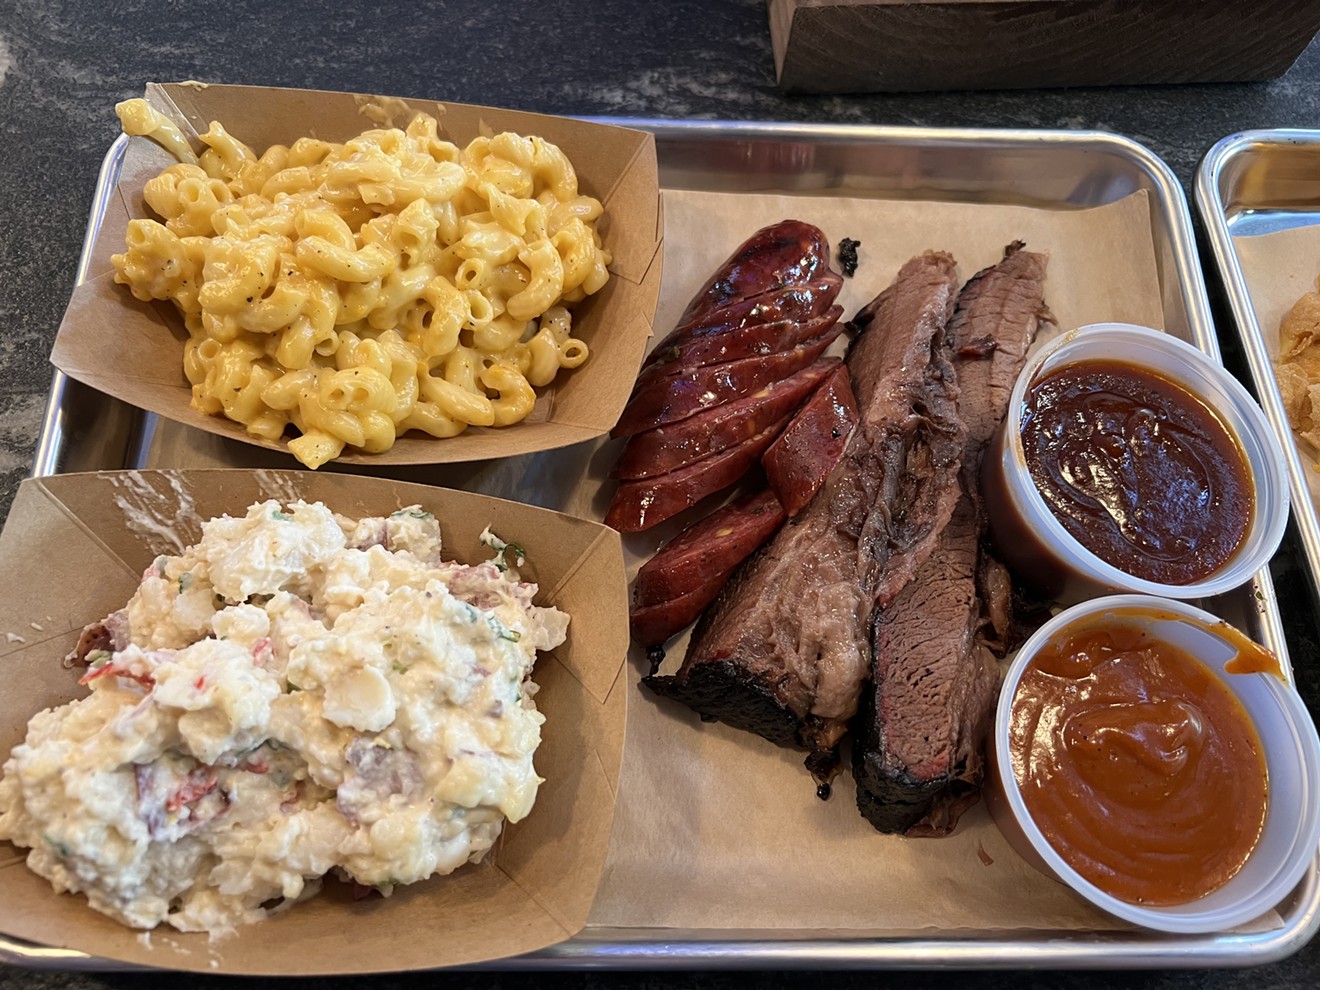 OAK'D BBQ has lots of shiny new toys in Addison, but the barbecue is still the main attraction.